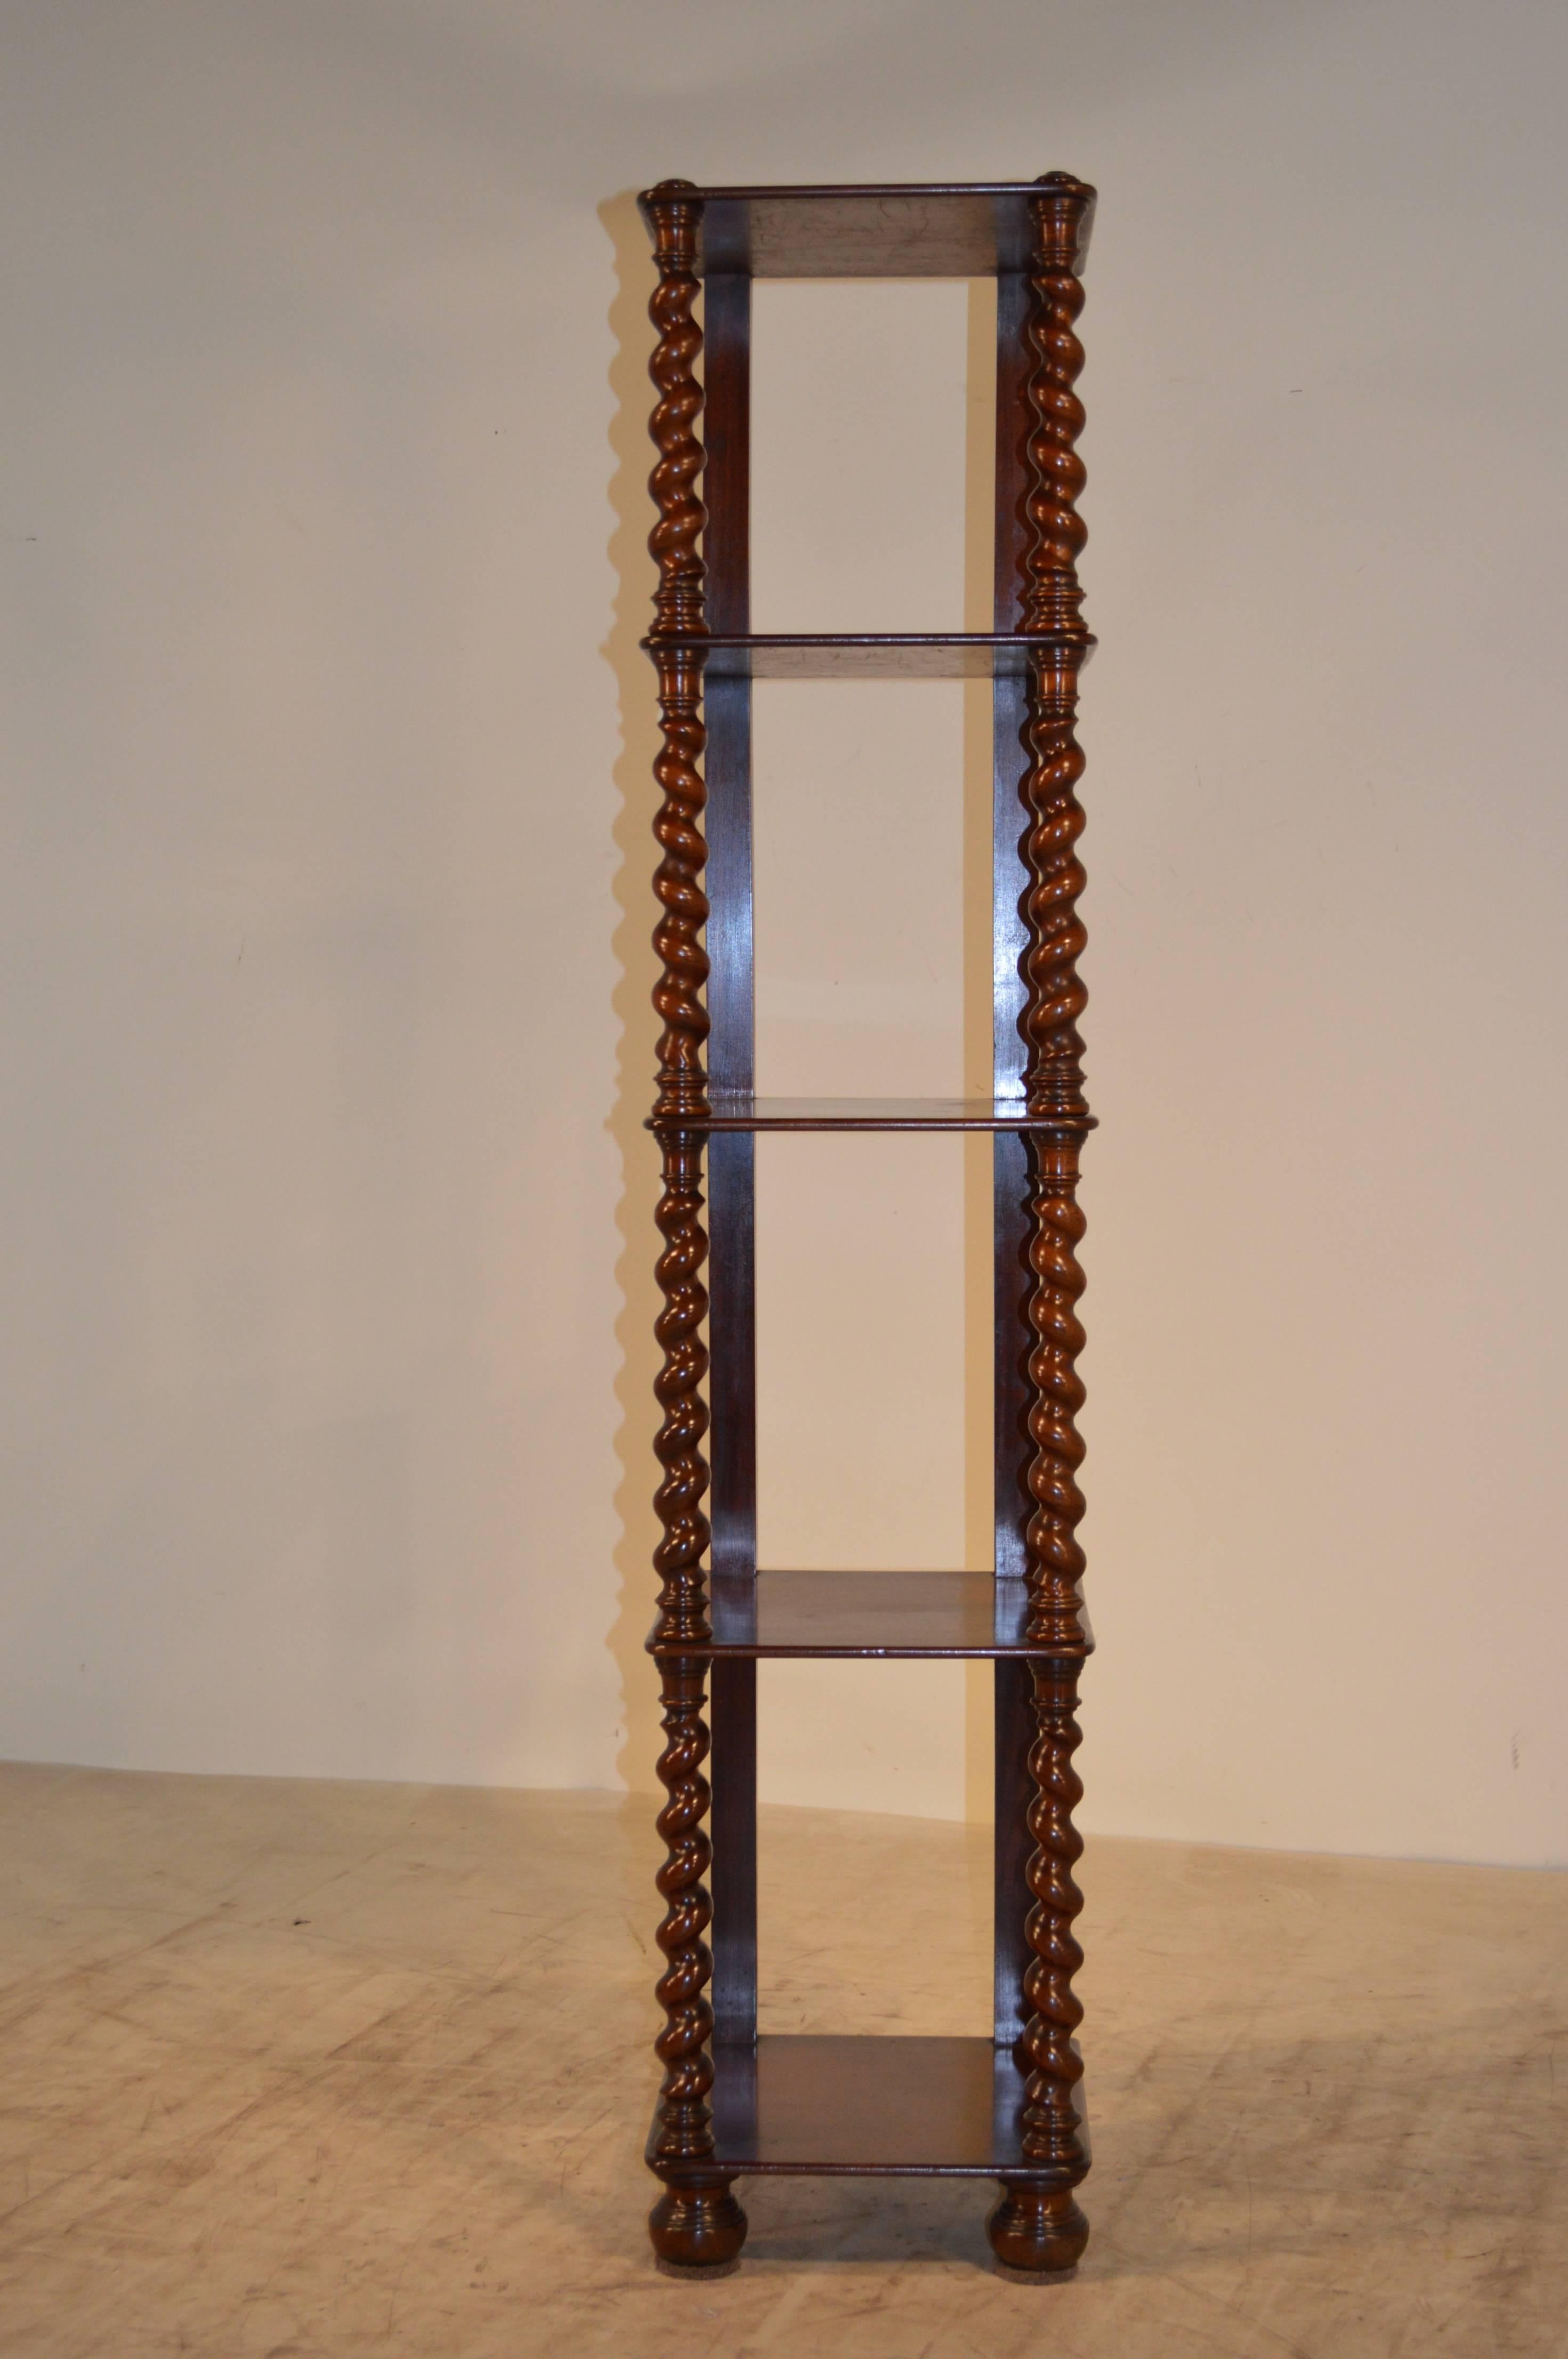 Mid-19th-century narrow English étagère with nicely hand-turned barley-twist shelf supports and turned feet. The back is flat for fitting against a wall. Age wear and shrinkage.
 